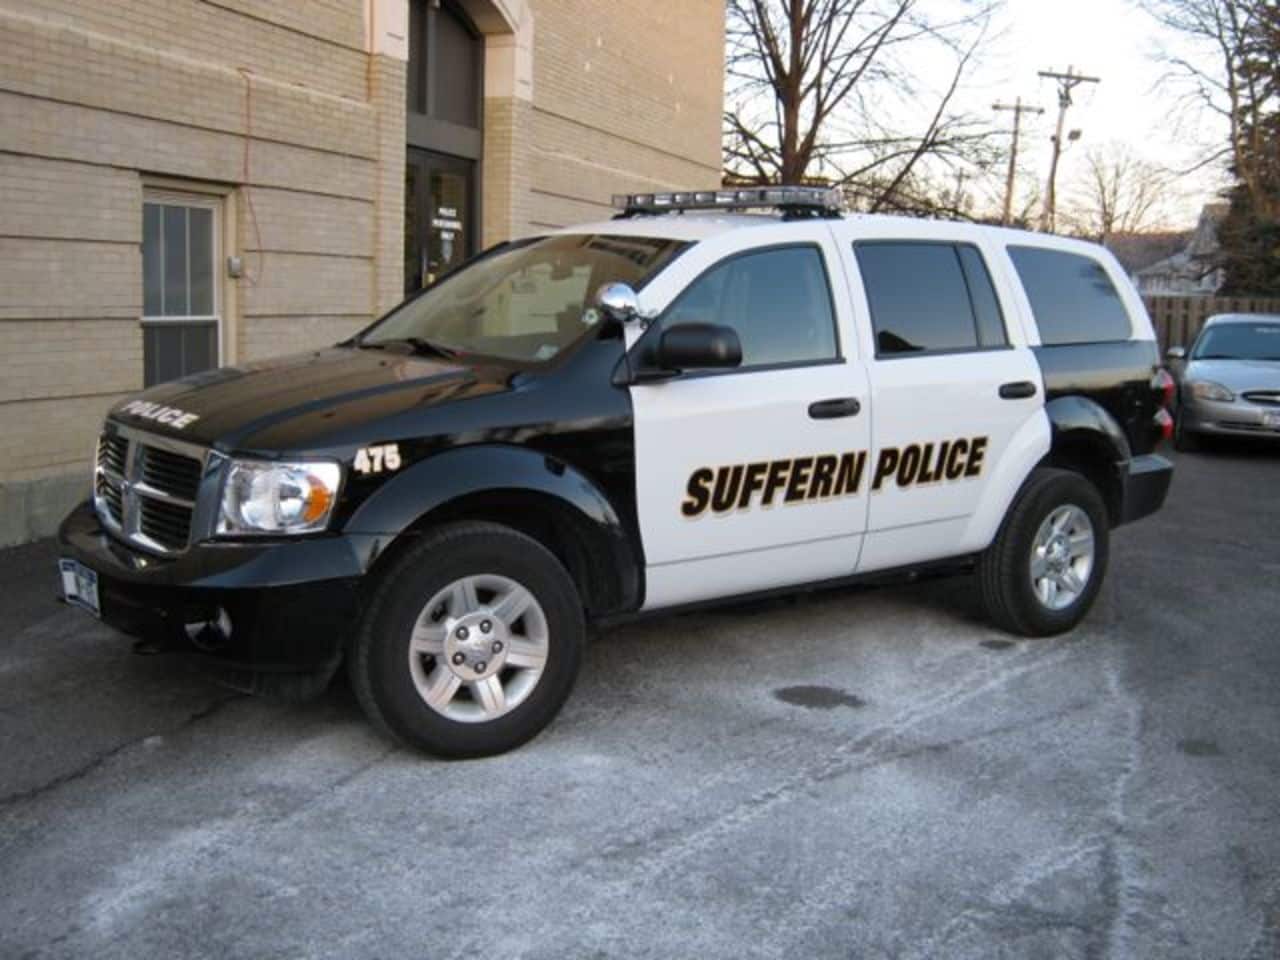 Suffern police have charged a 22-year-old New Jersey man with choking his girlfriend during an argument.